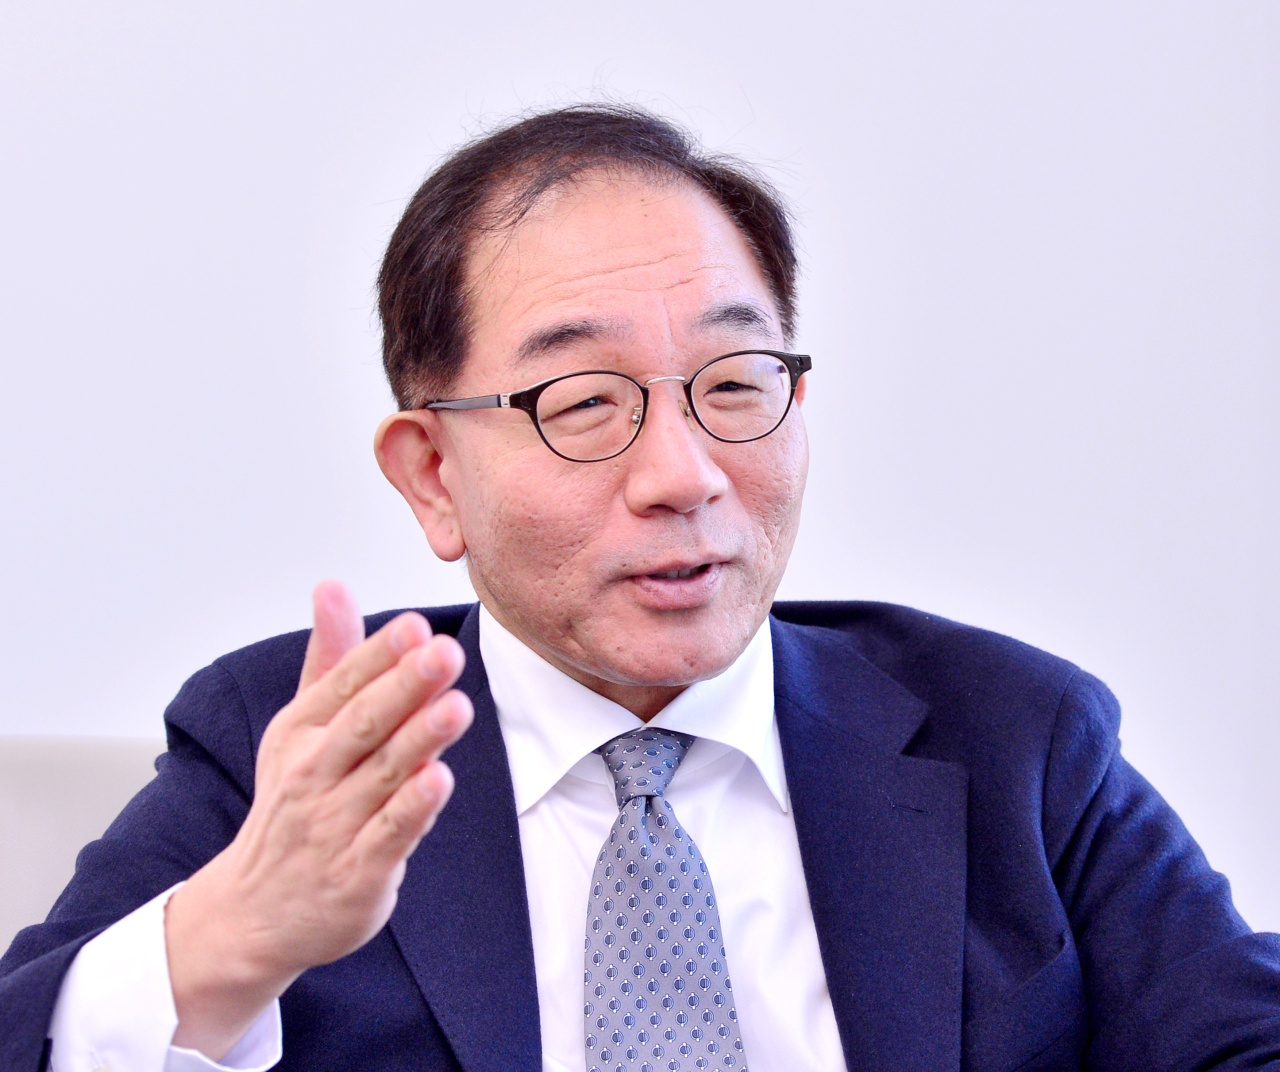 Korea Foundation President Lee Geun speaks during an interview with The Korea Herald at the Korea Foundation’s office in central Seoul on Oct. 28. (Park Hyun-koo/The Korea Herald)